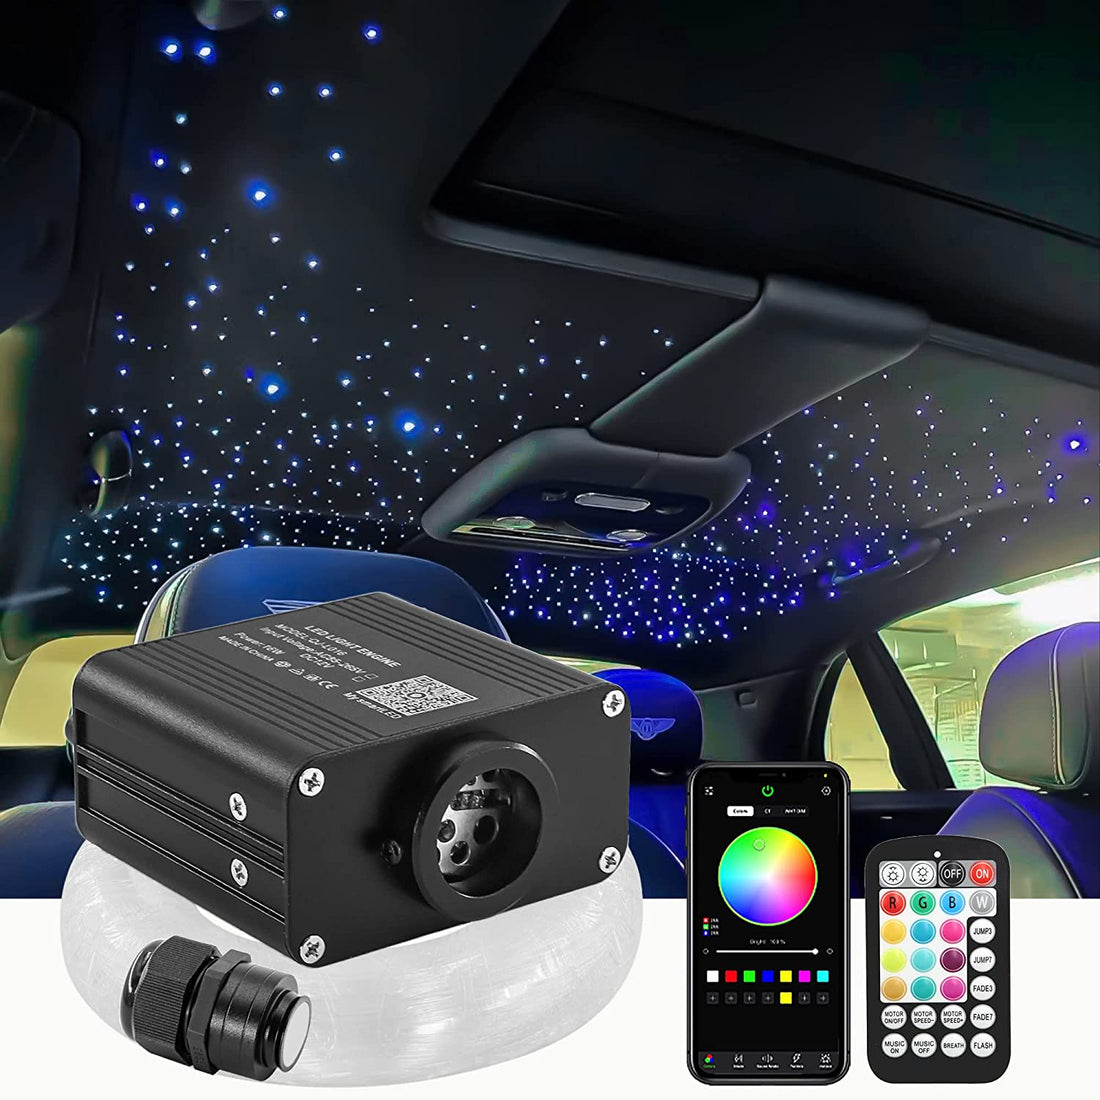 16W RGBW Twinkle LED Fiber Optic Lights for Car Truck's Headliner with Bluetooth APP Control | STARLIGHTheadliners.shop